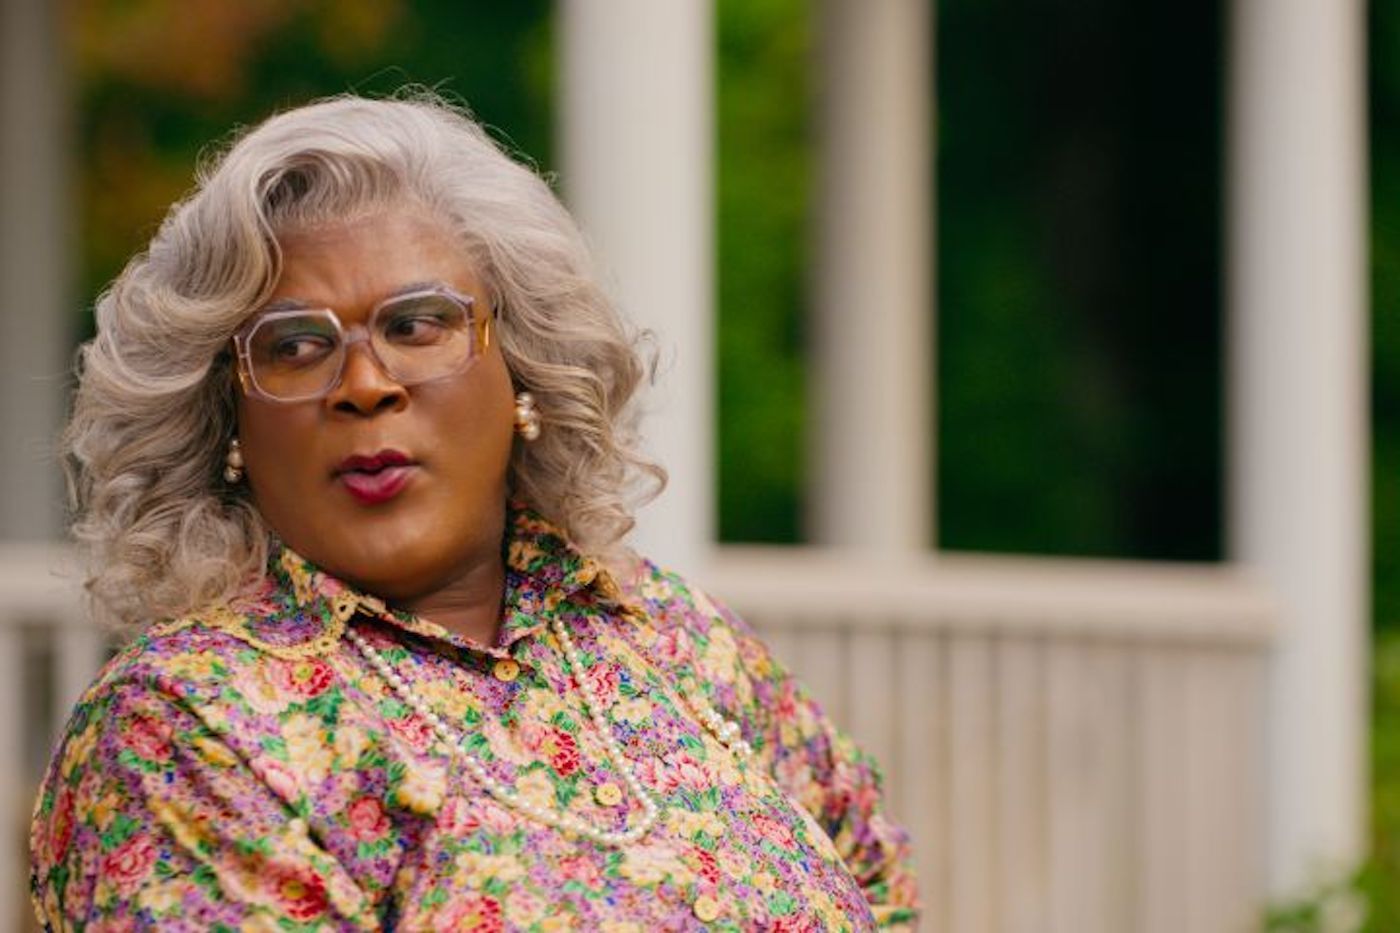 Tyler Perry as Madea in A Madea Homecoming